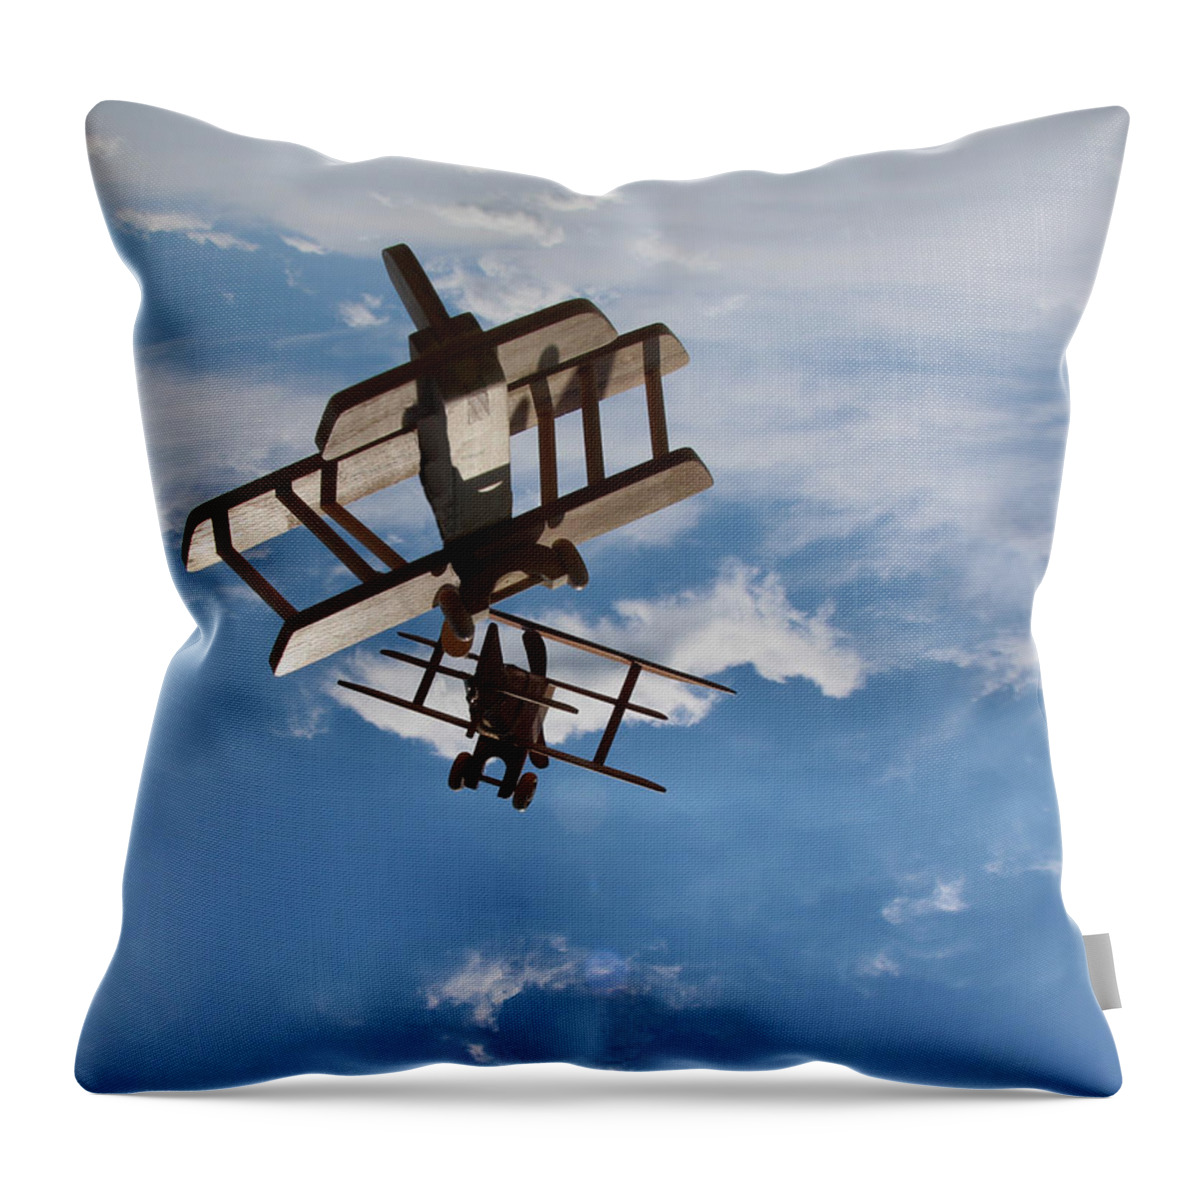 Wwi Throw Pillow featuring the photograph Jouet Escadrille - 3 by Lin Grosvenor